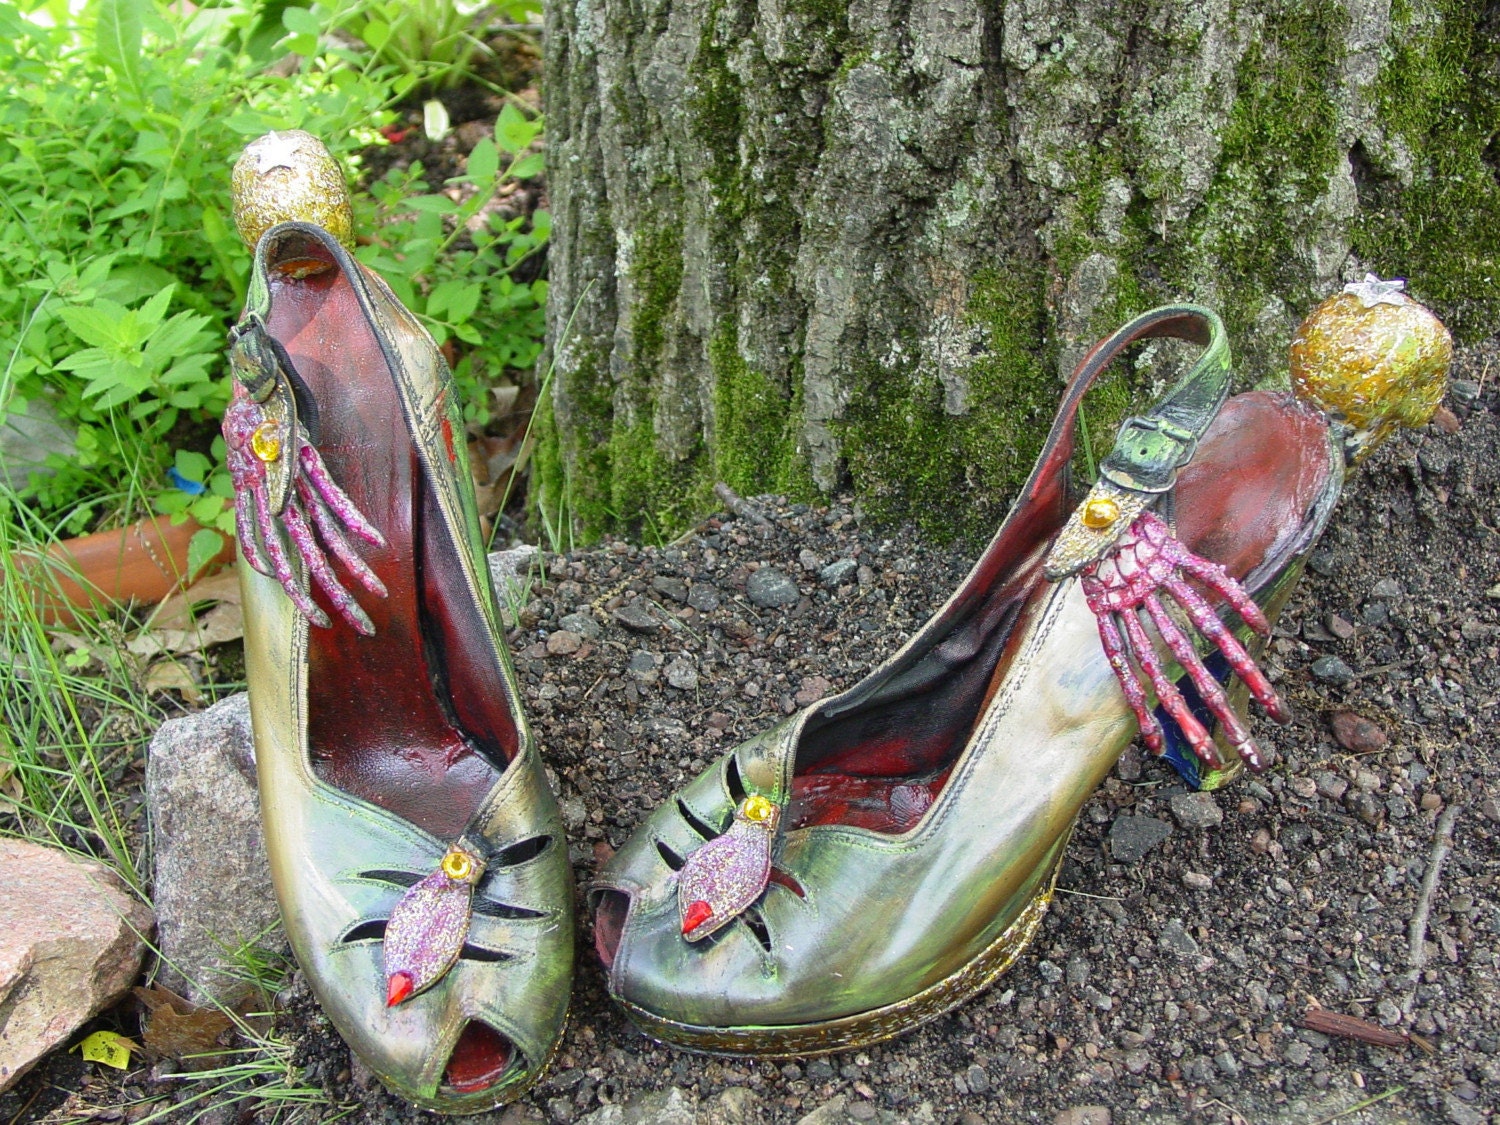 The wonderful WORLD OF OZ shoes series. The wicked witch of the west. recycled shoes by artist Catherine Reinke